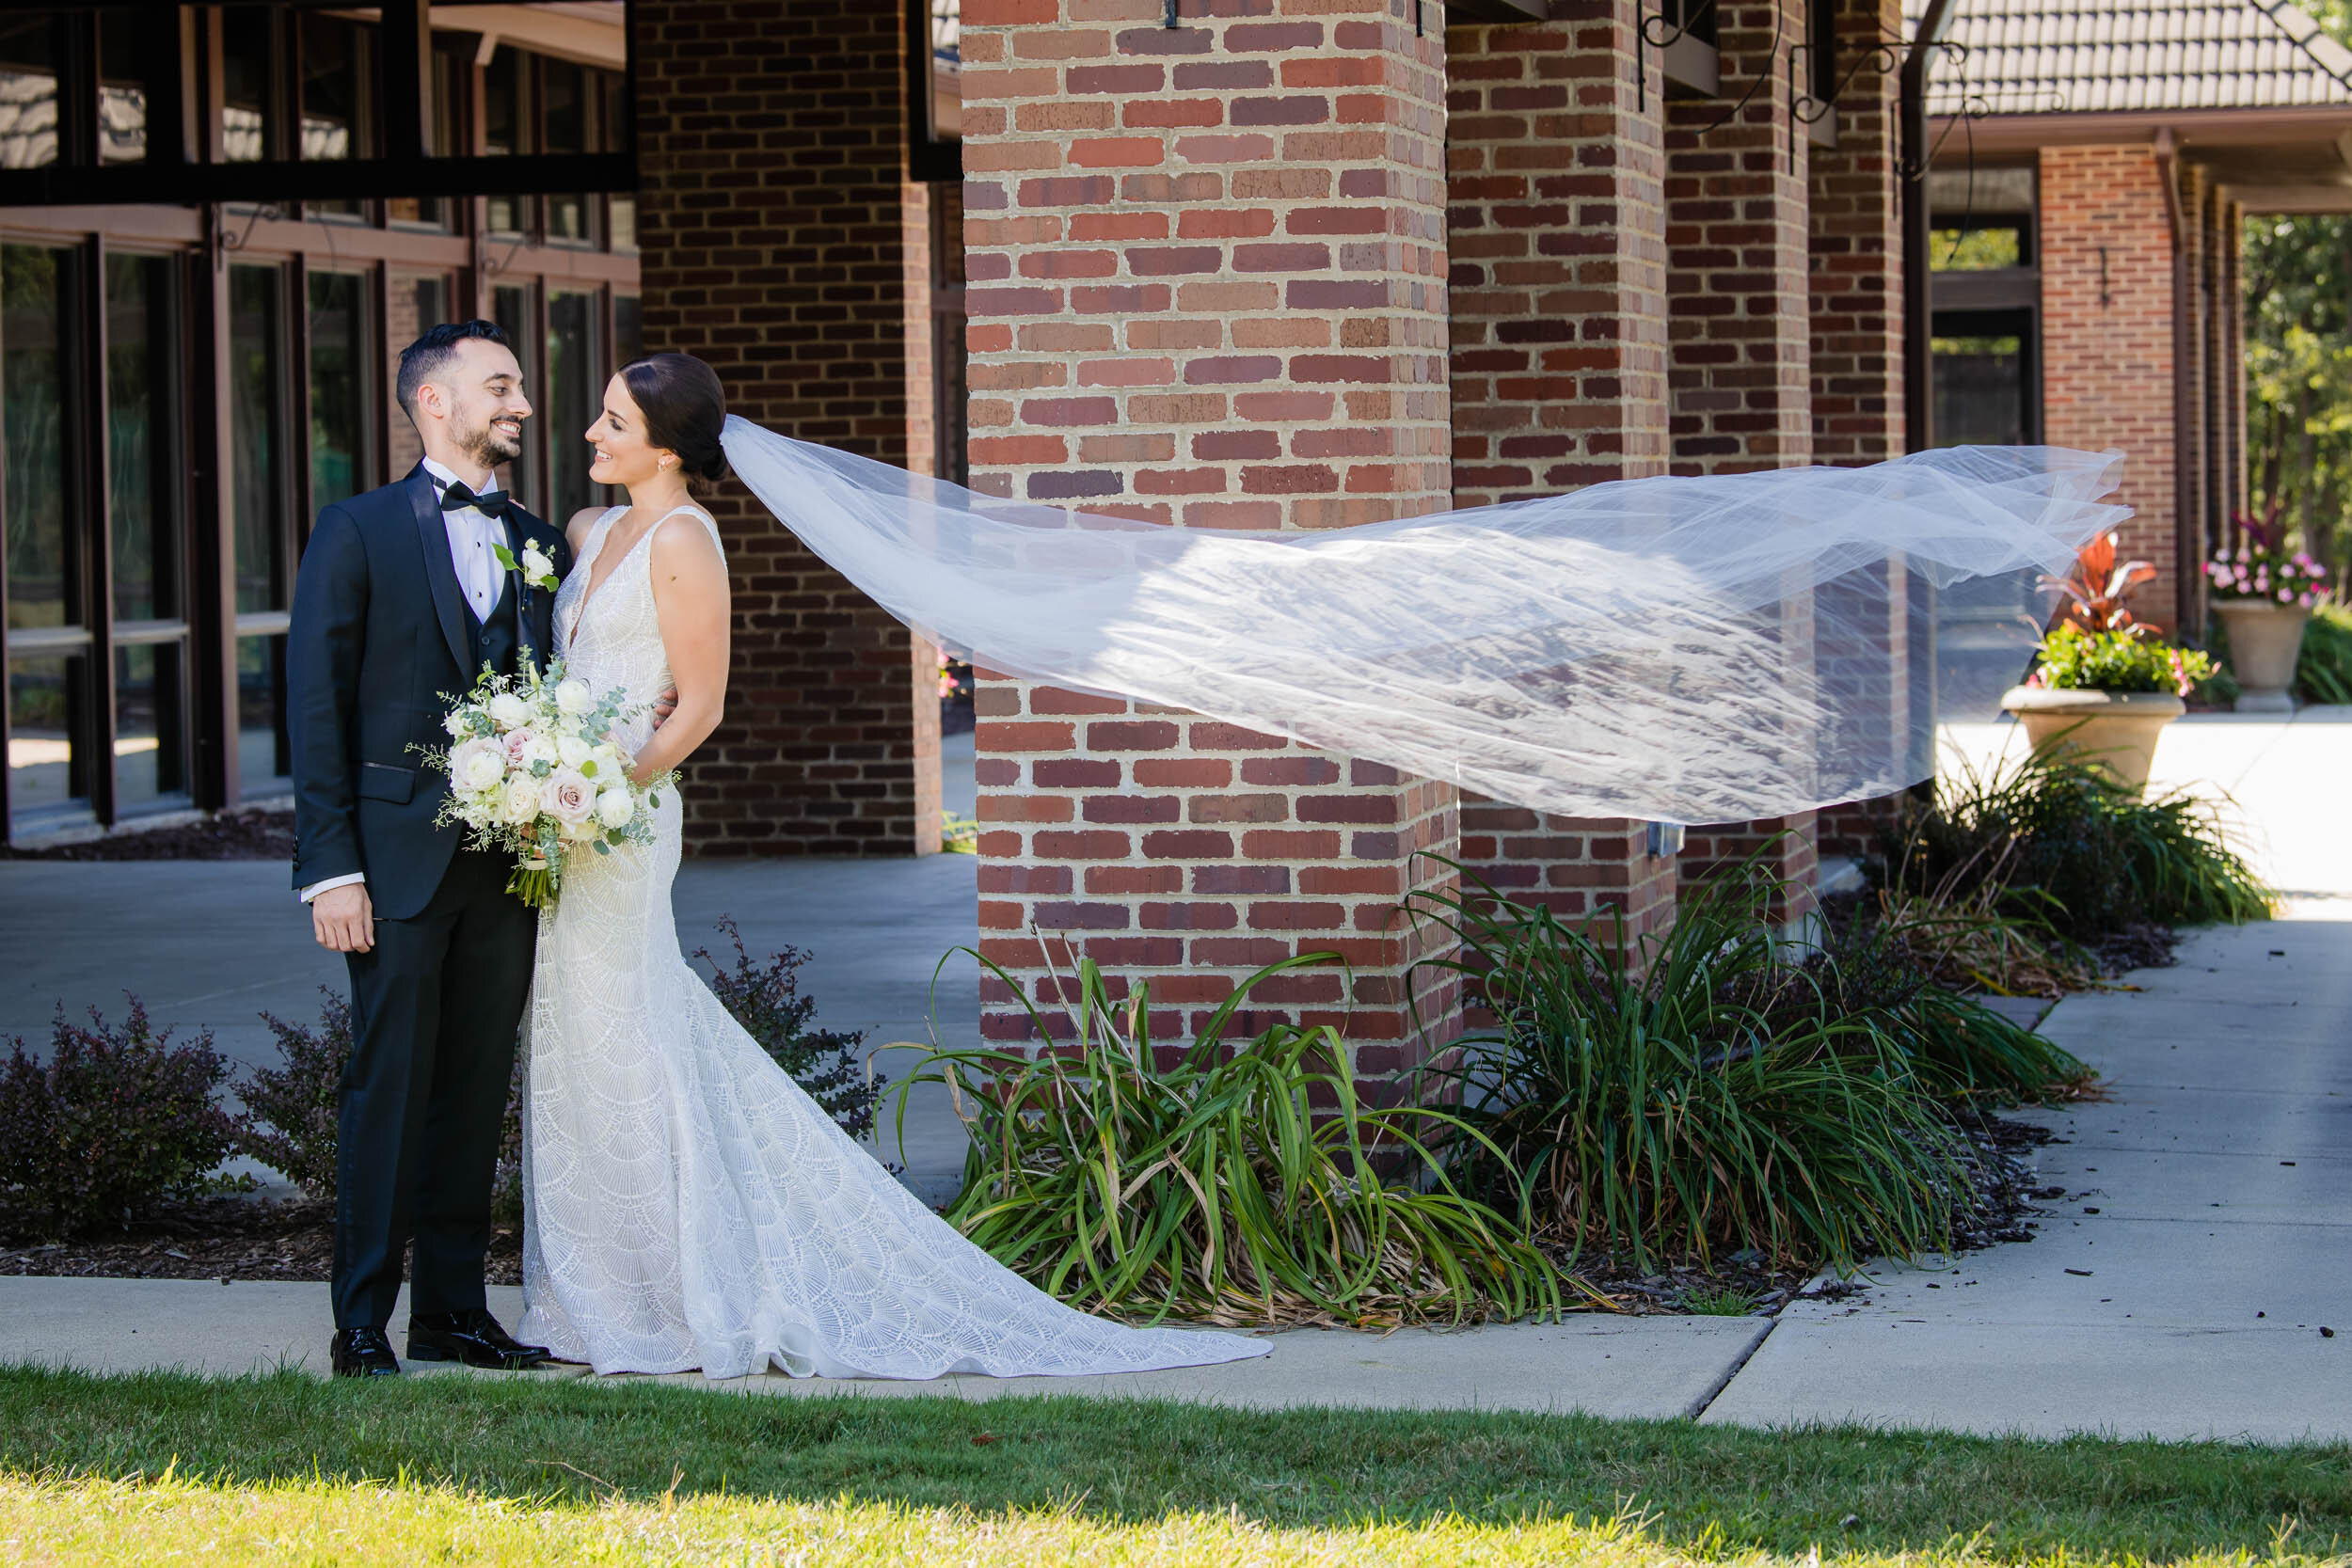 Brides veil blows in the wind:  Chicago wedding photography by J. Brown Photography.